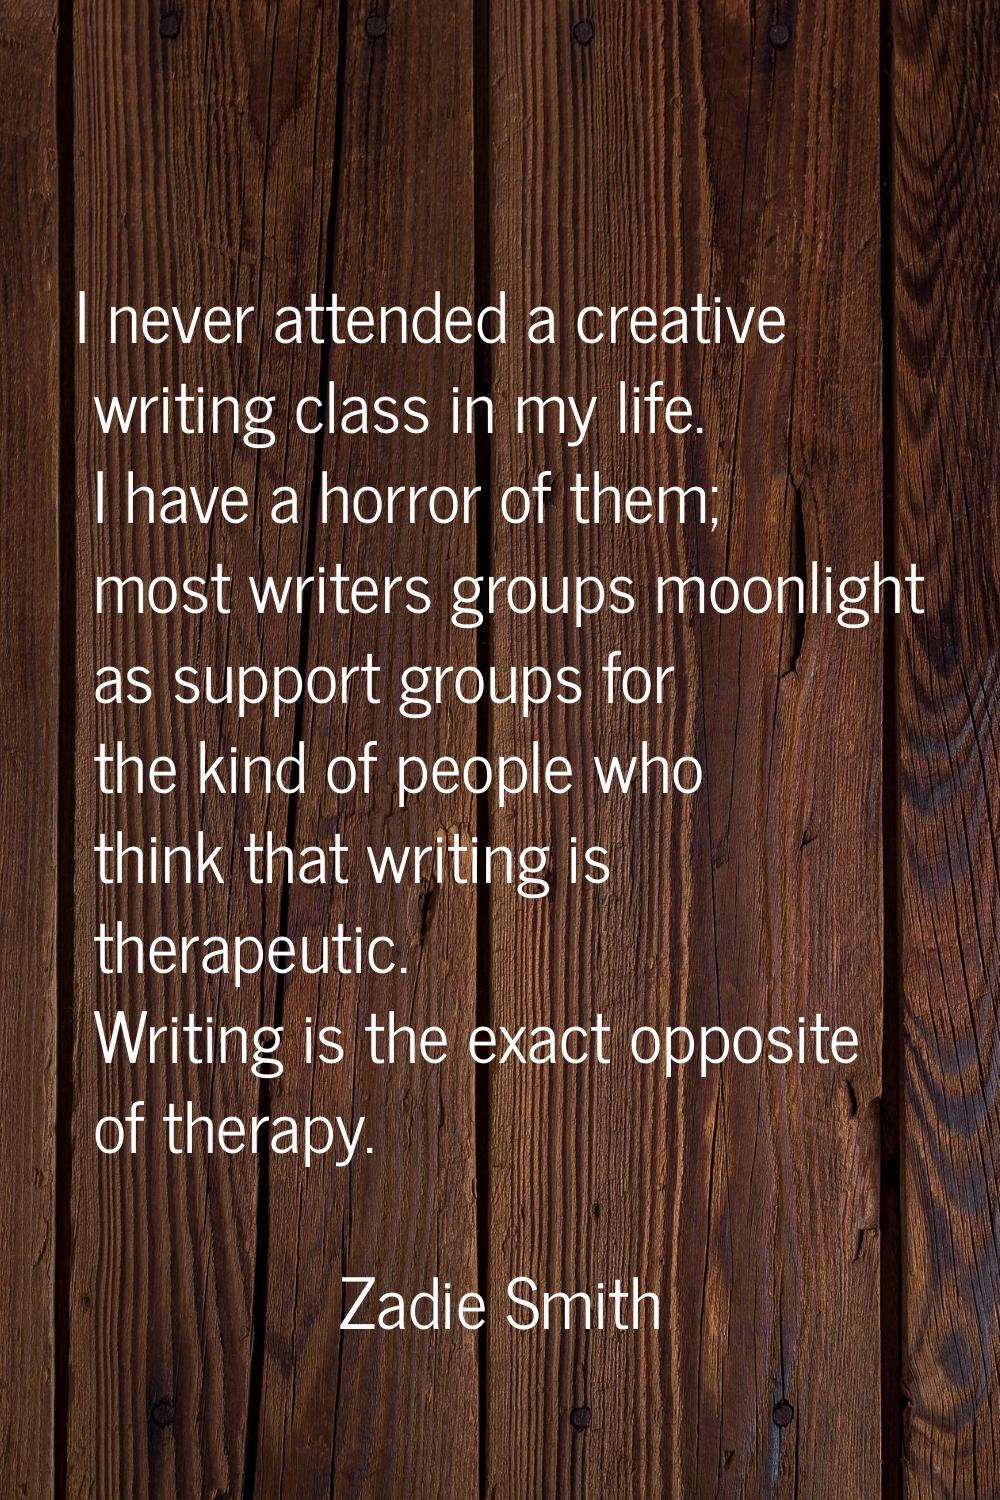 I never attended a creative writing class in my life. I have a horror of them; most writers groups 